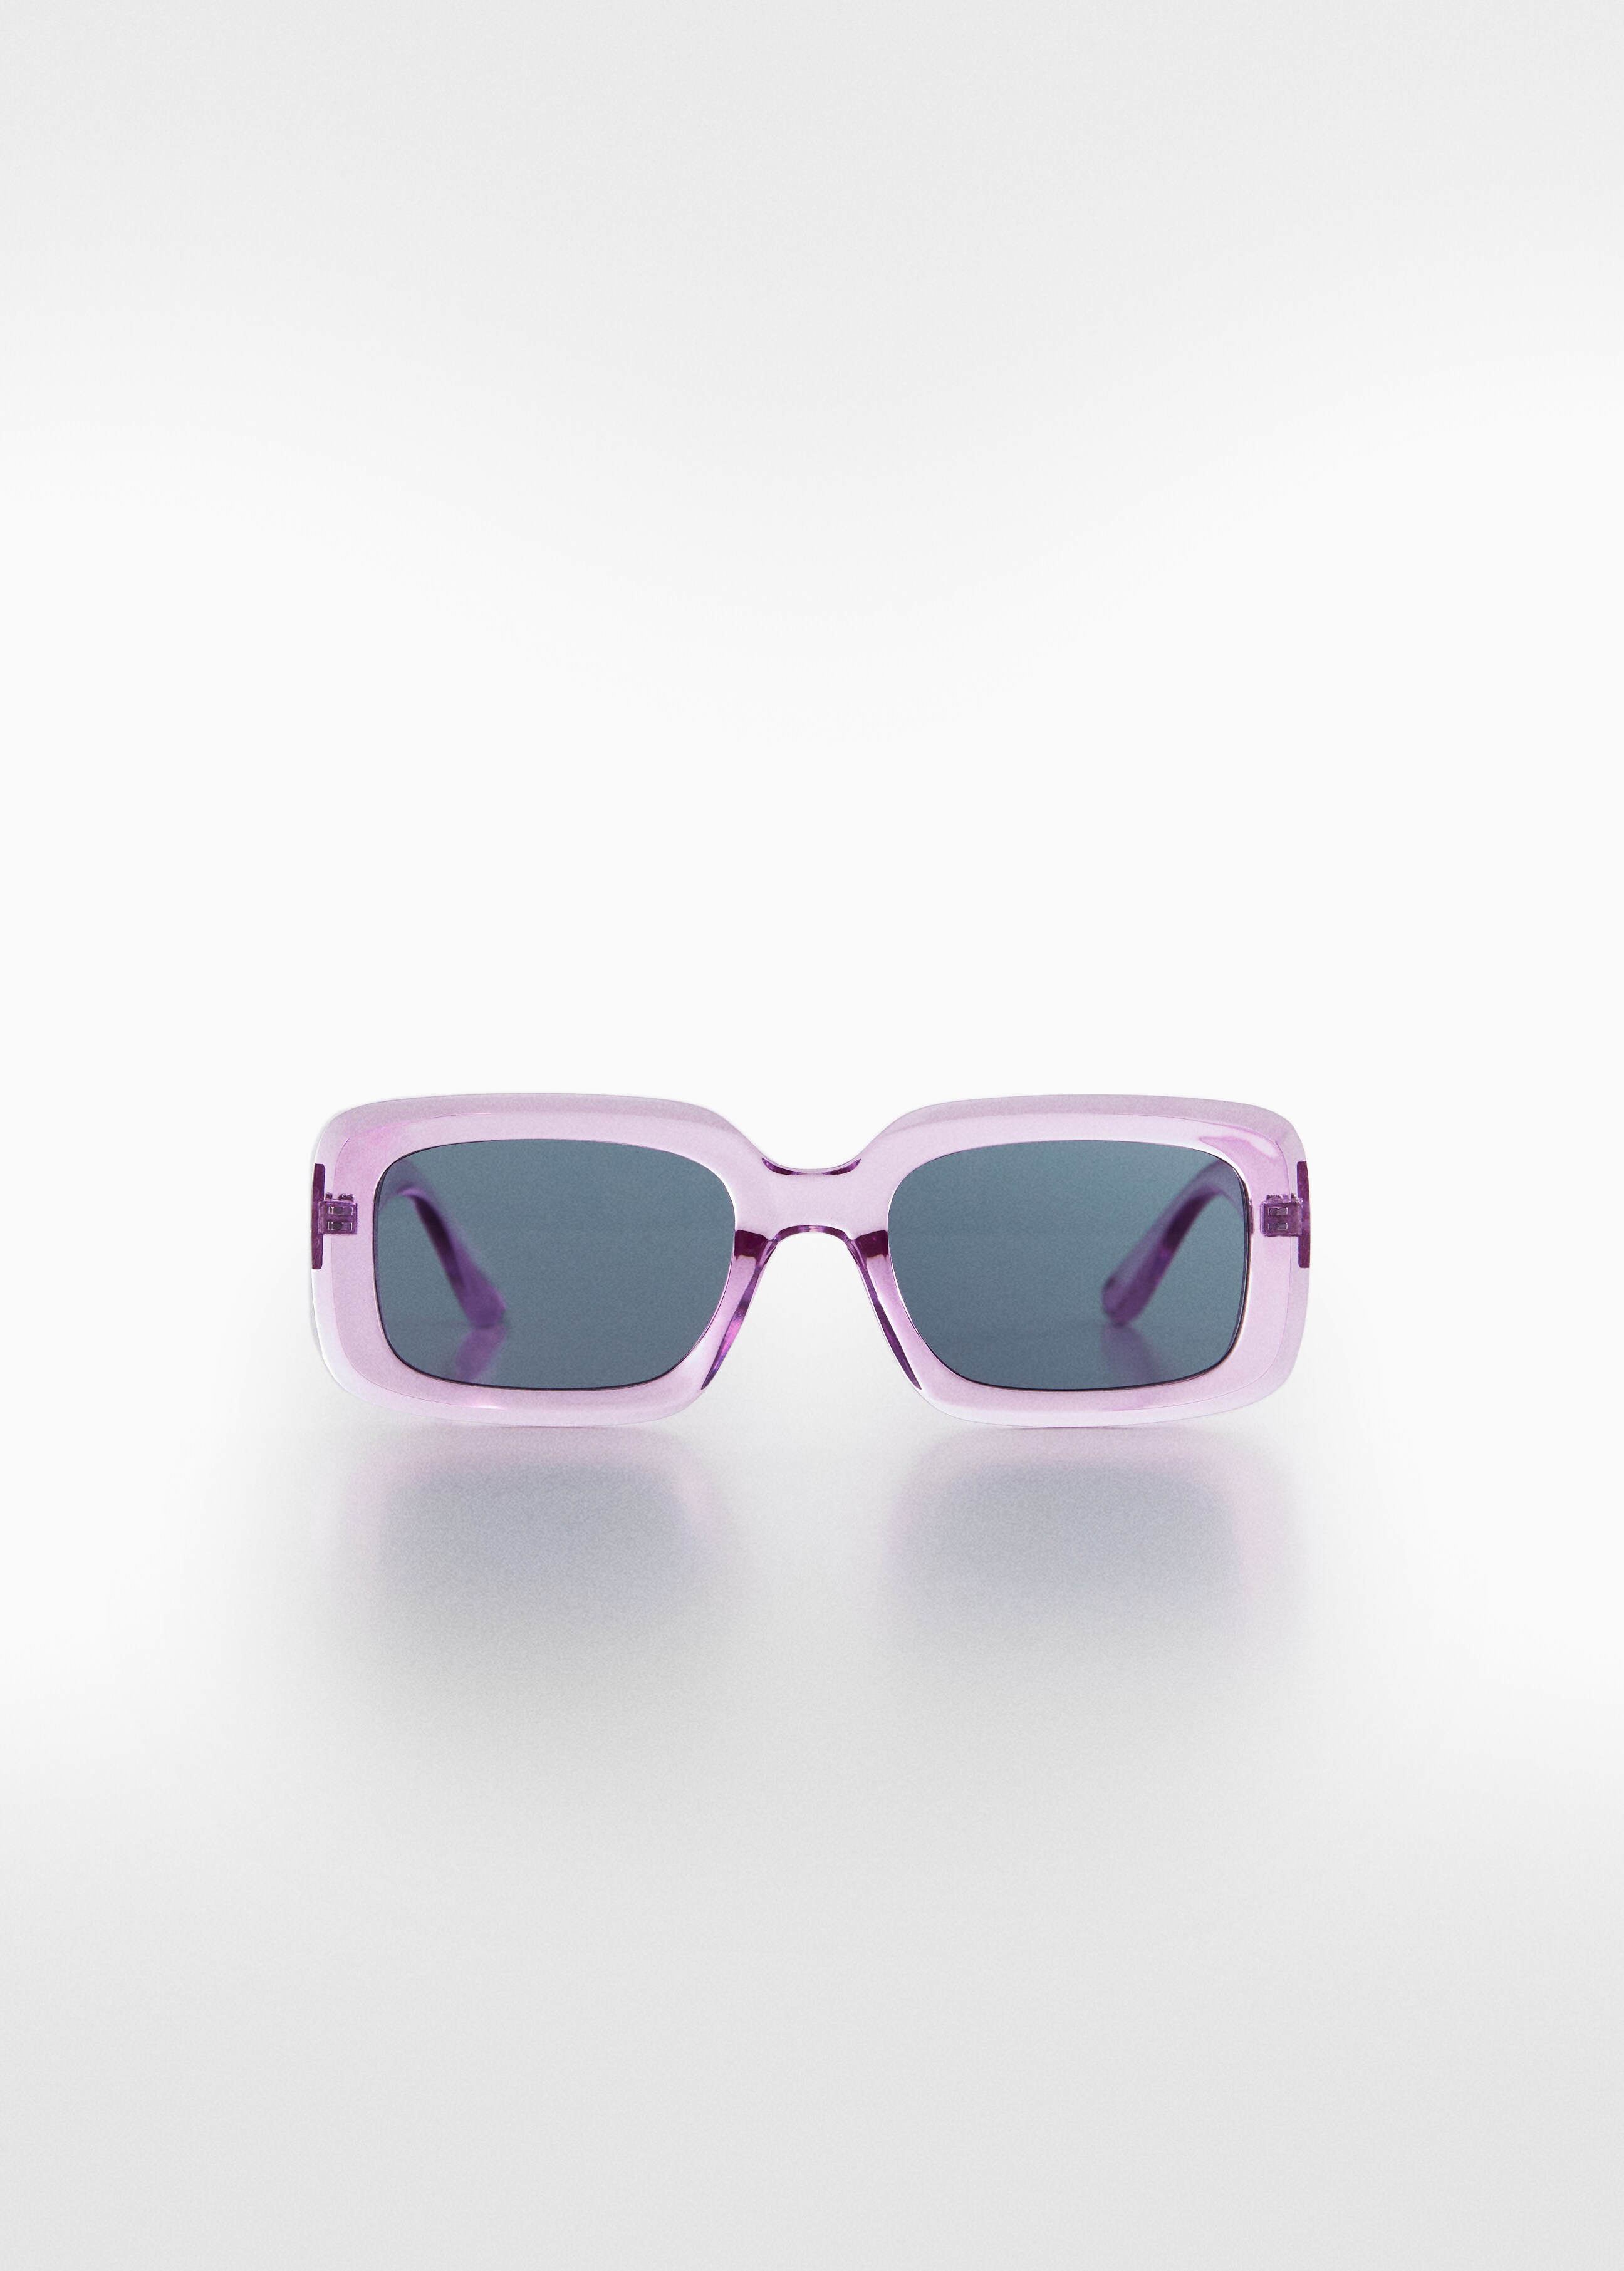 Rectangular sunglasses - Article without model